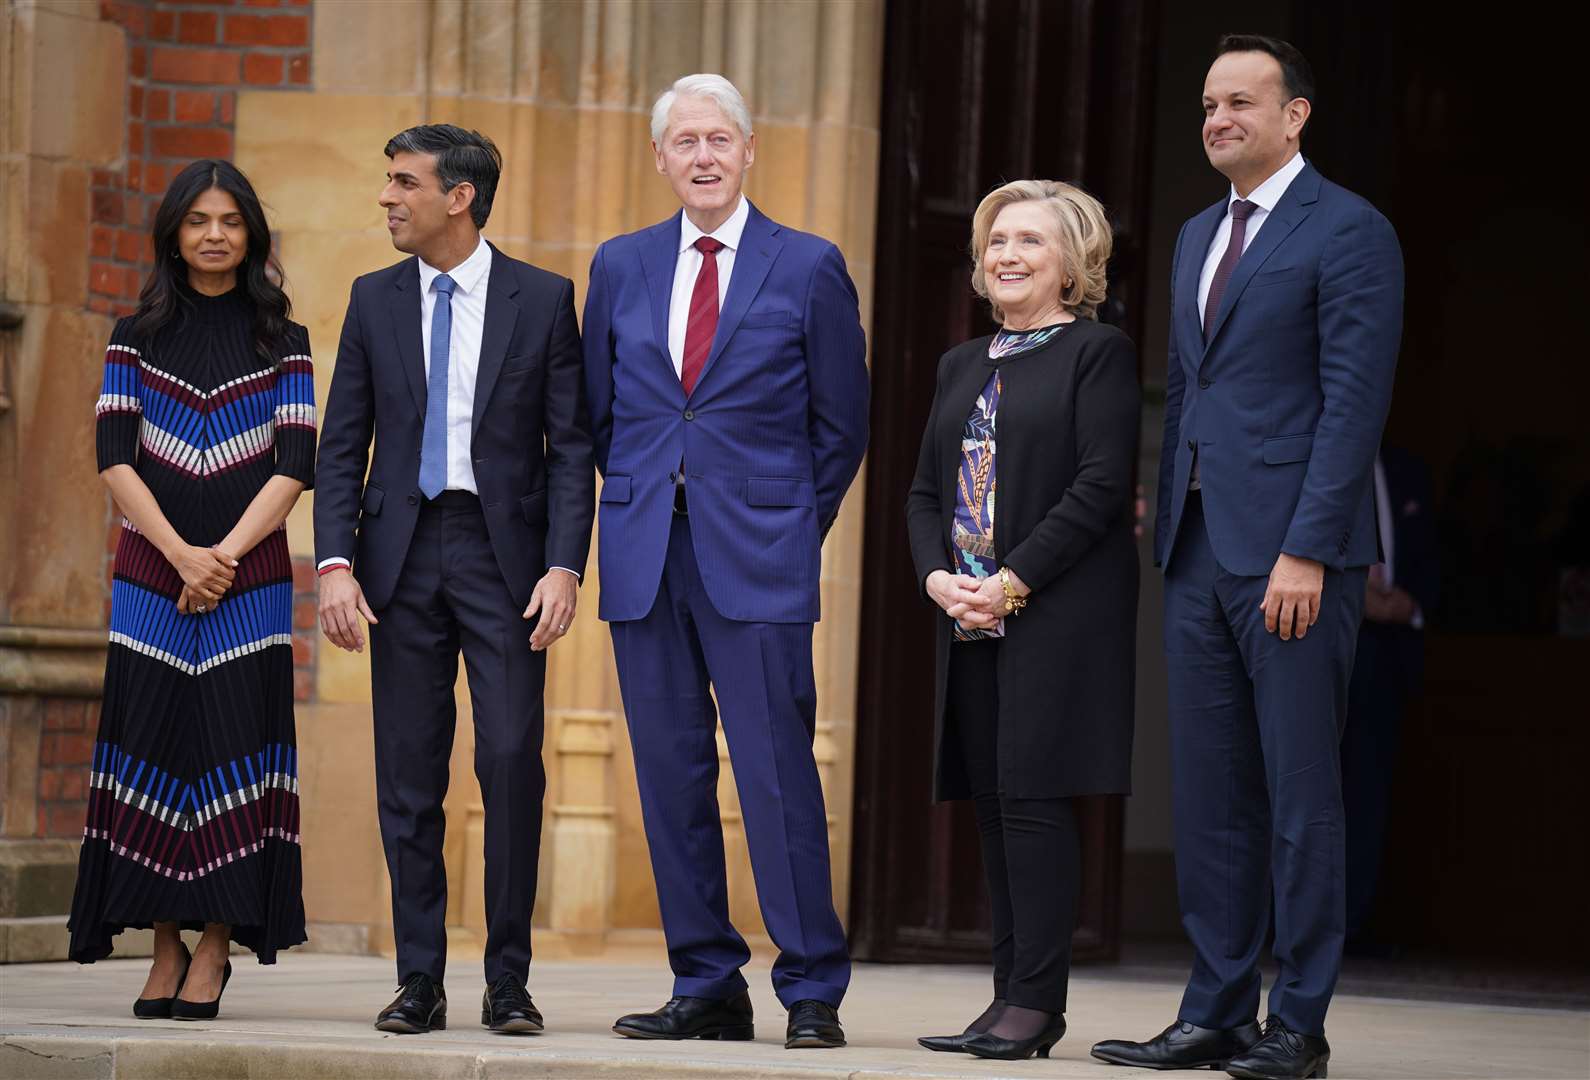 From left: Akshata Murty, Prime Minister Rishi Sunak, former US president Bill Clinton, Hillary Clinton and Taoiseach Leo Varadkar after the international conference to mark the 25th anniversary of the Belfast/Good Friday Agreement (Niall Carson/PA)